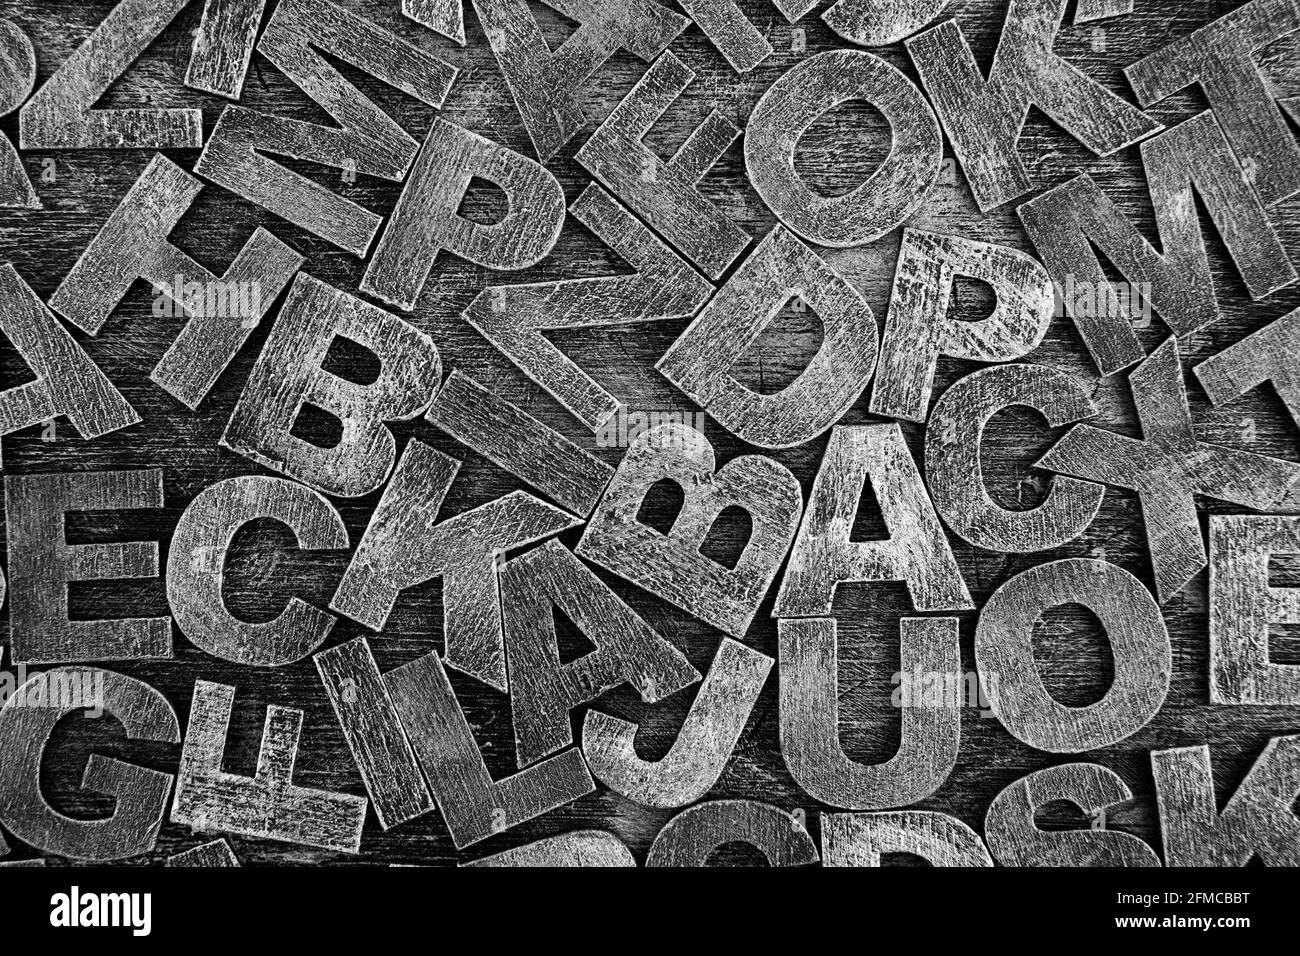 Pile of old vintage wooden letters. Typography background composition. Stock Photo